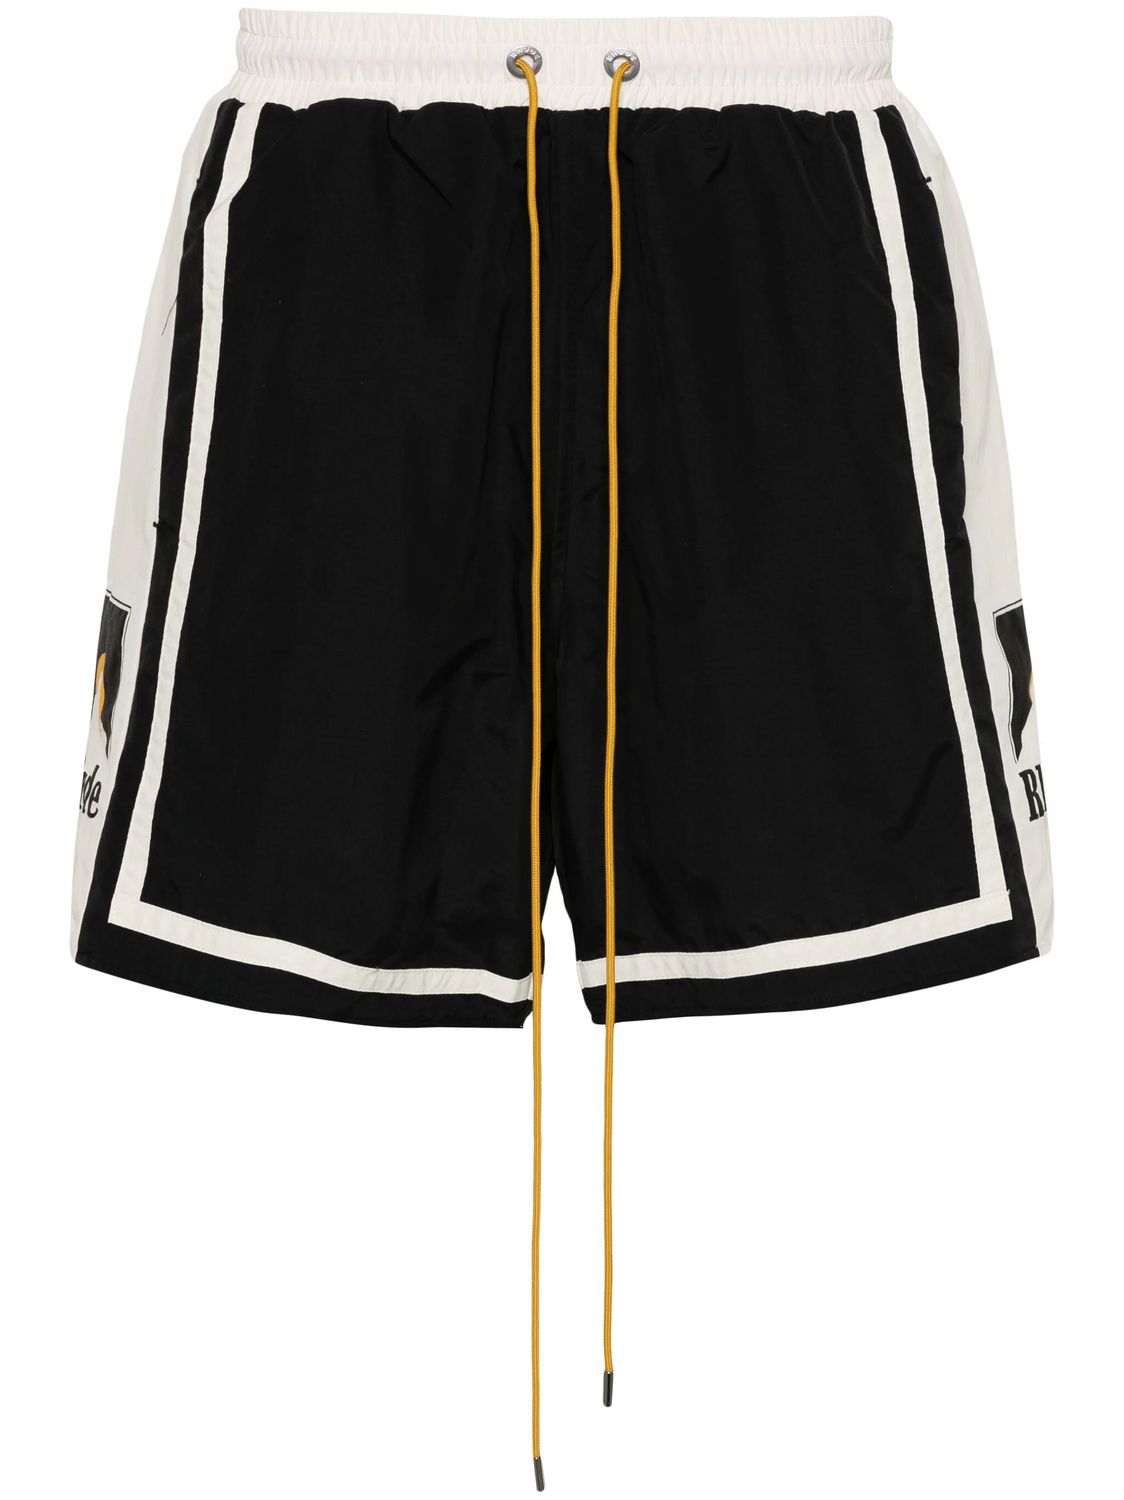 RHUDE Men's Color Block Sports Shorts with Striped Detail and Logo Print